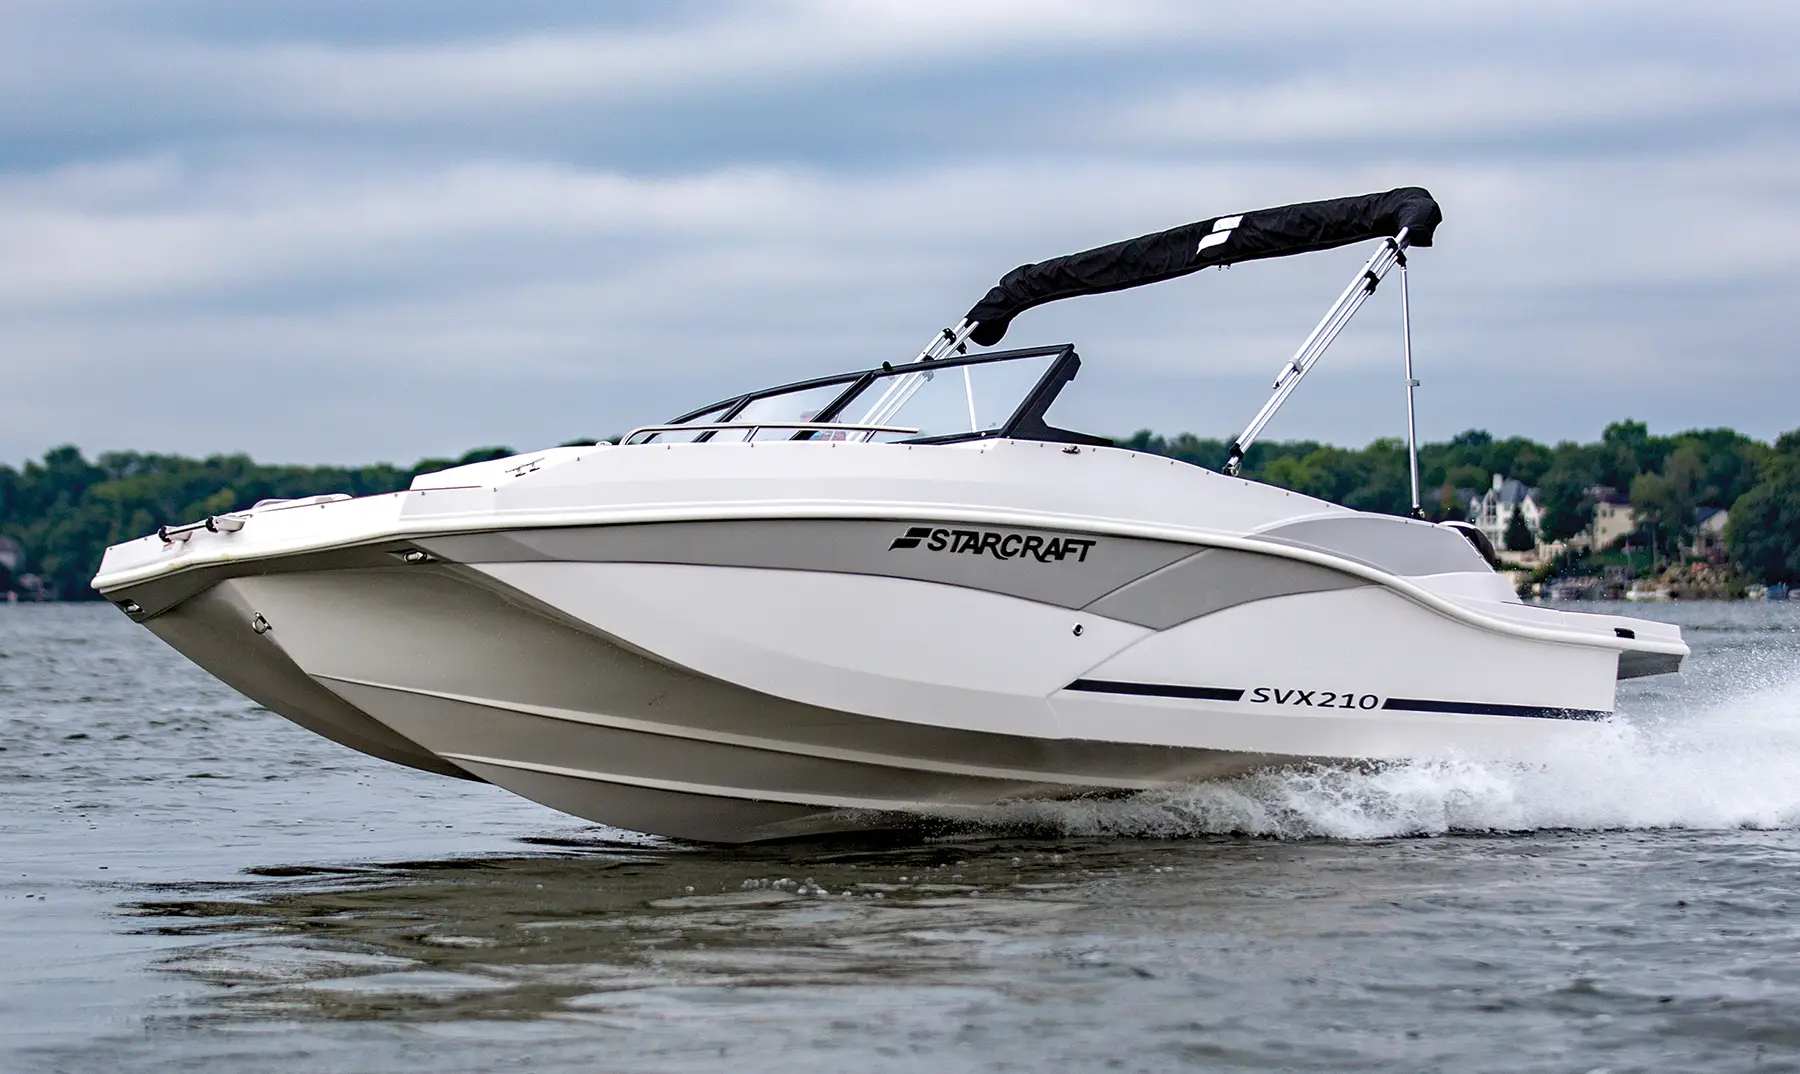 Profile view of Starcraft SVX in motion on water with blue sky and clouds